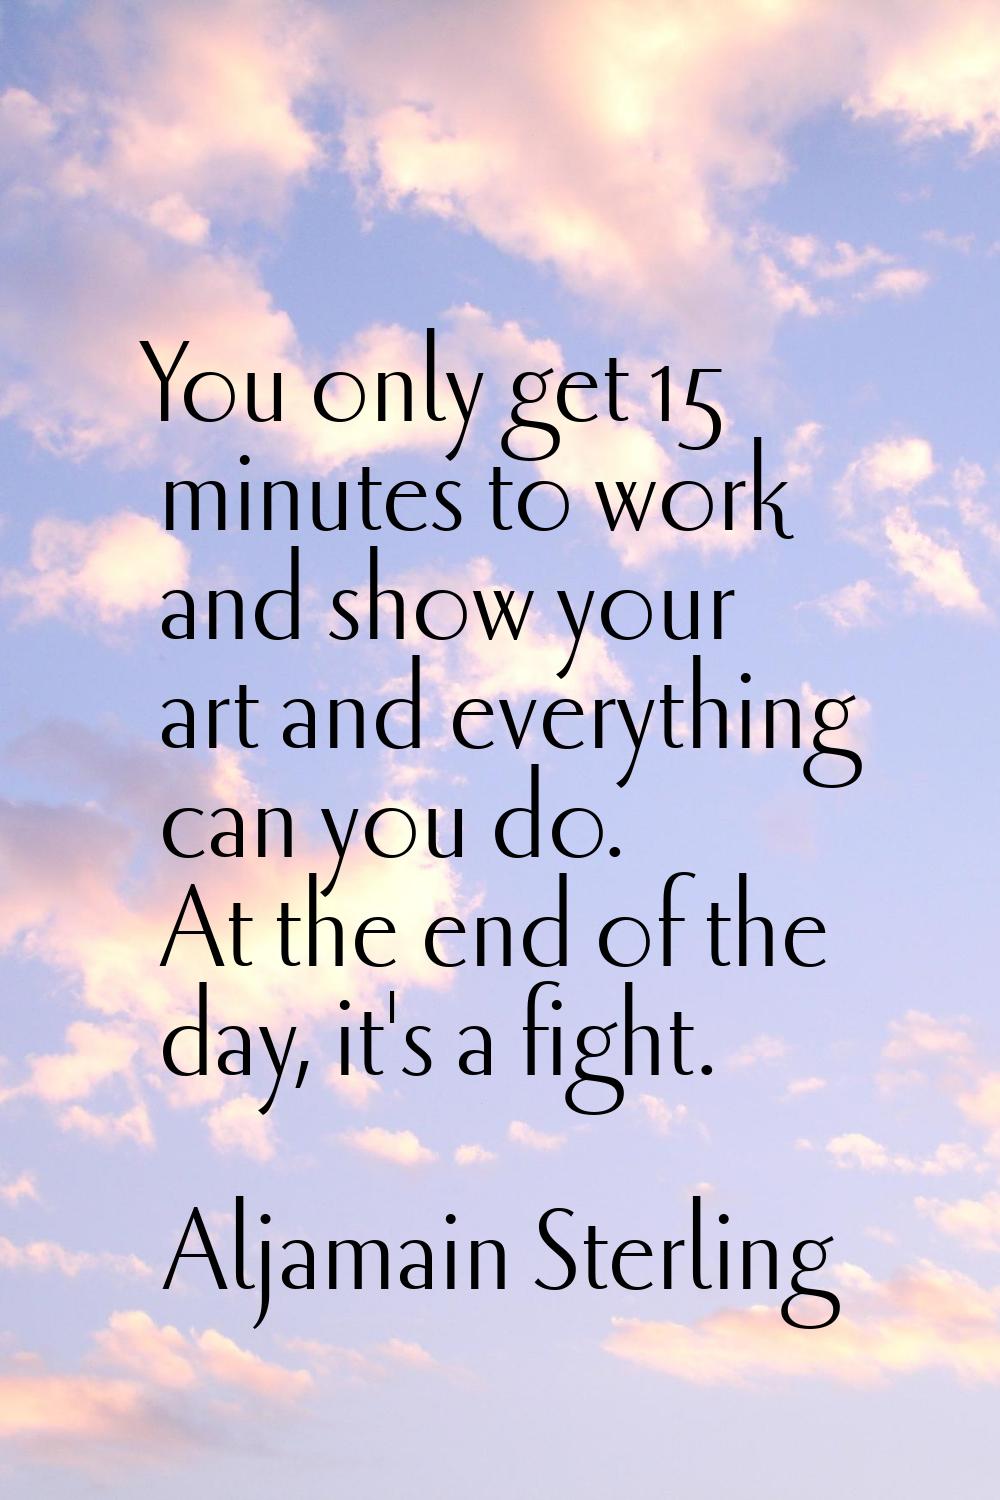 You only get 15 minutes to work and show your art and everything can you do. At the end of the day,